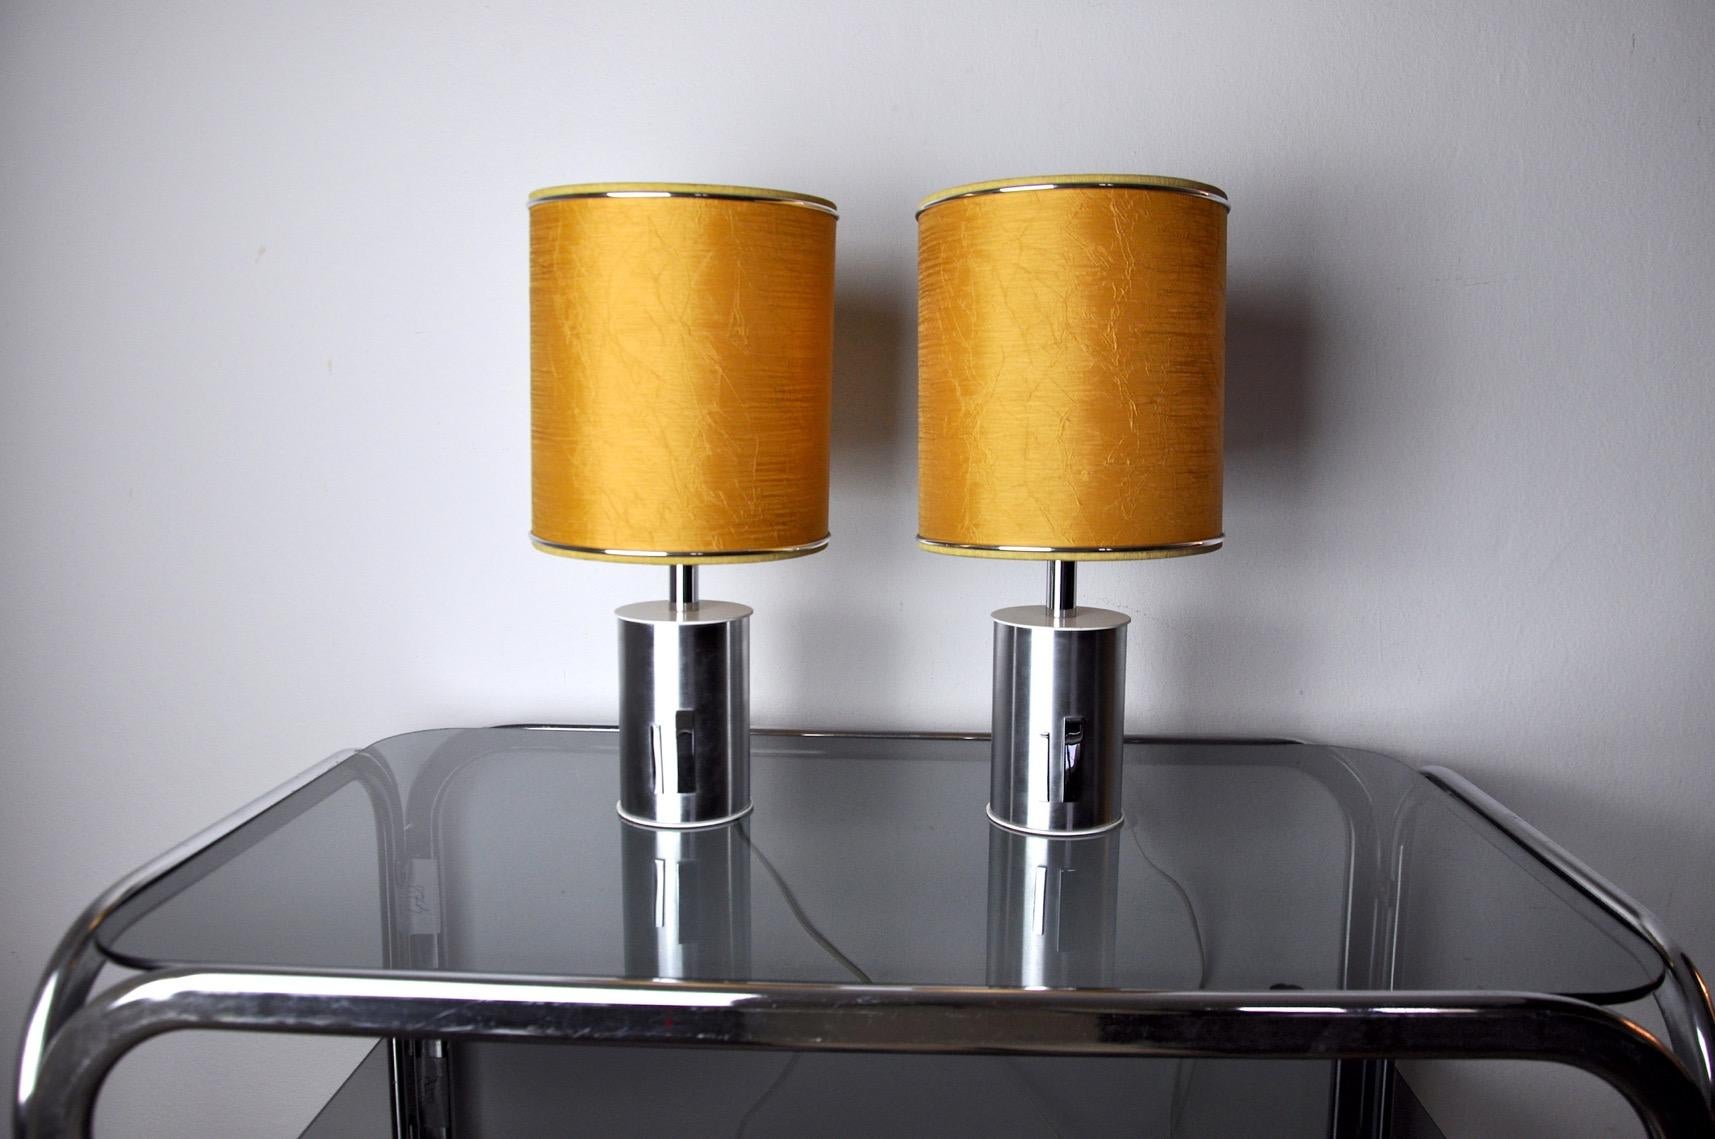 Very nice pair of futuristic lamps designed and produced by marca sl in spain in the 1970s. Structure in metal, lampshade in golden canvas. Unique object that will illuminate wonderfully and bring a real design touch to your interior. Electricity